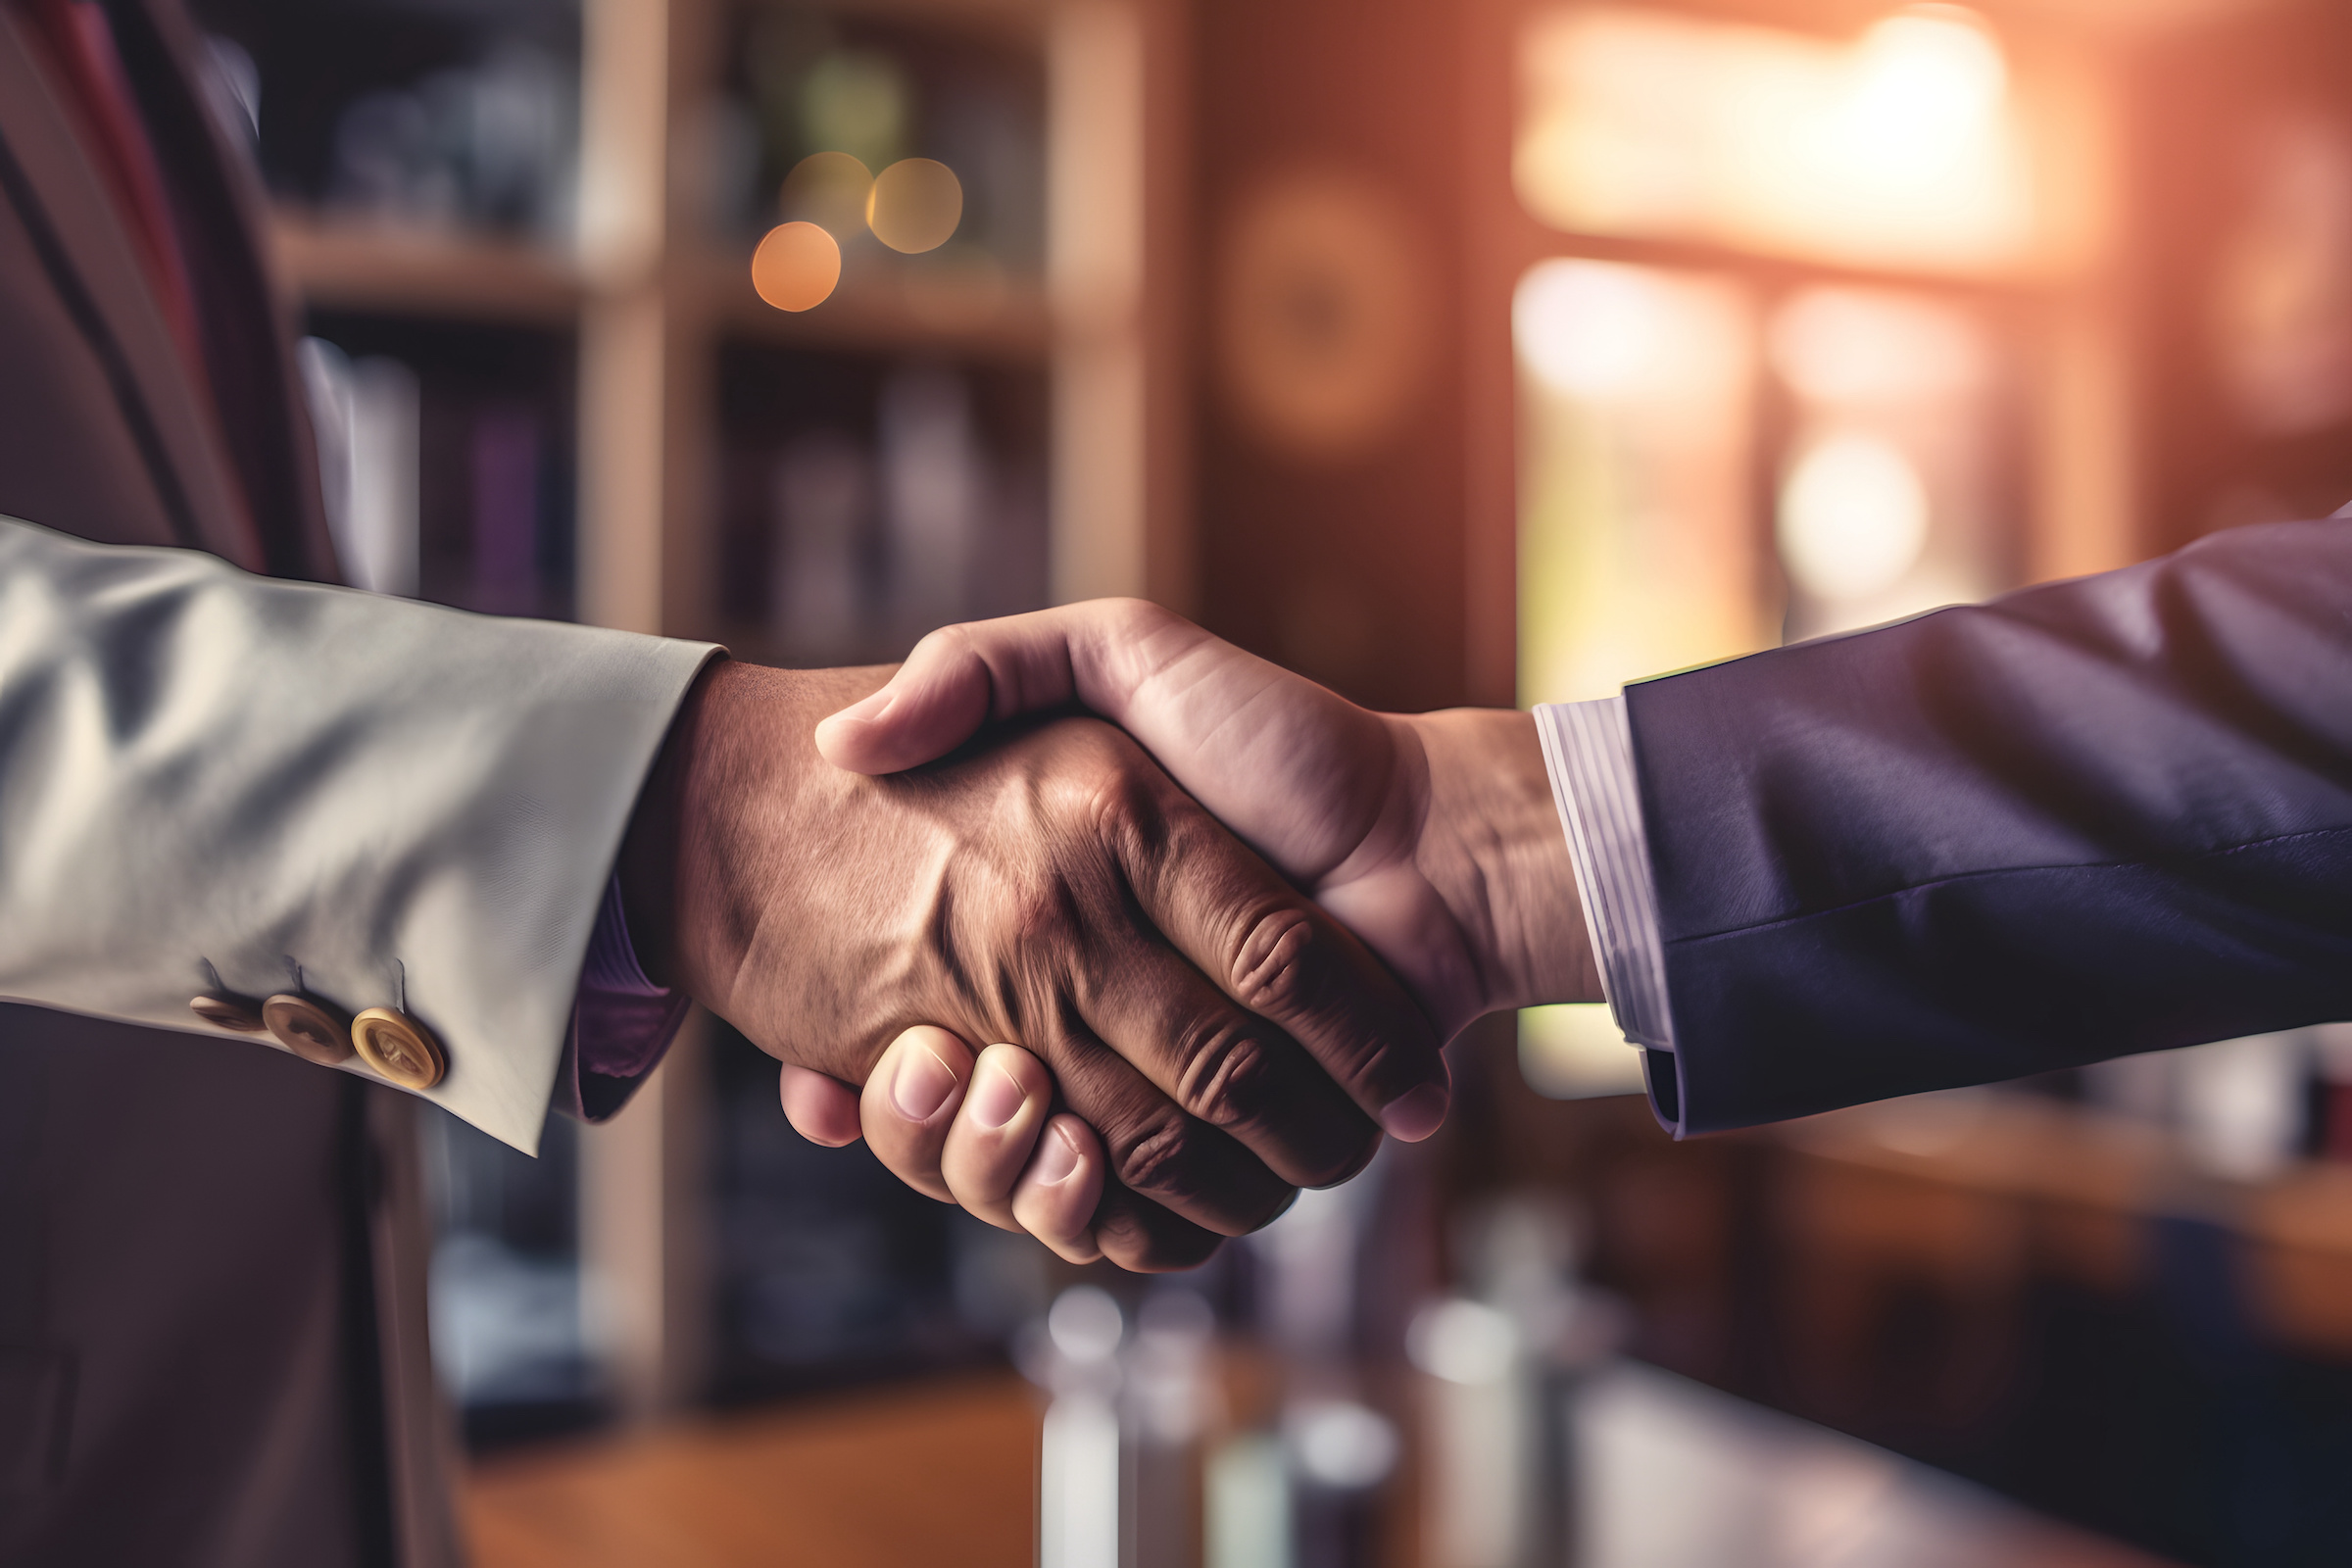 Two individuals shake hands in a business environment